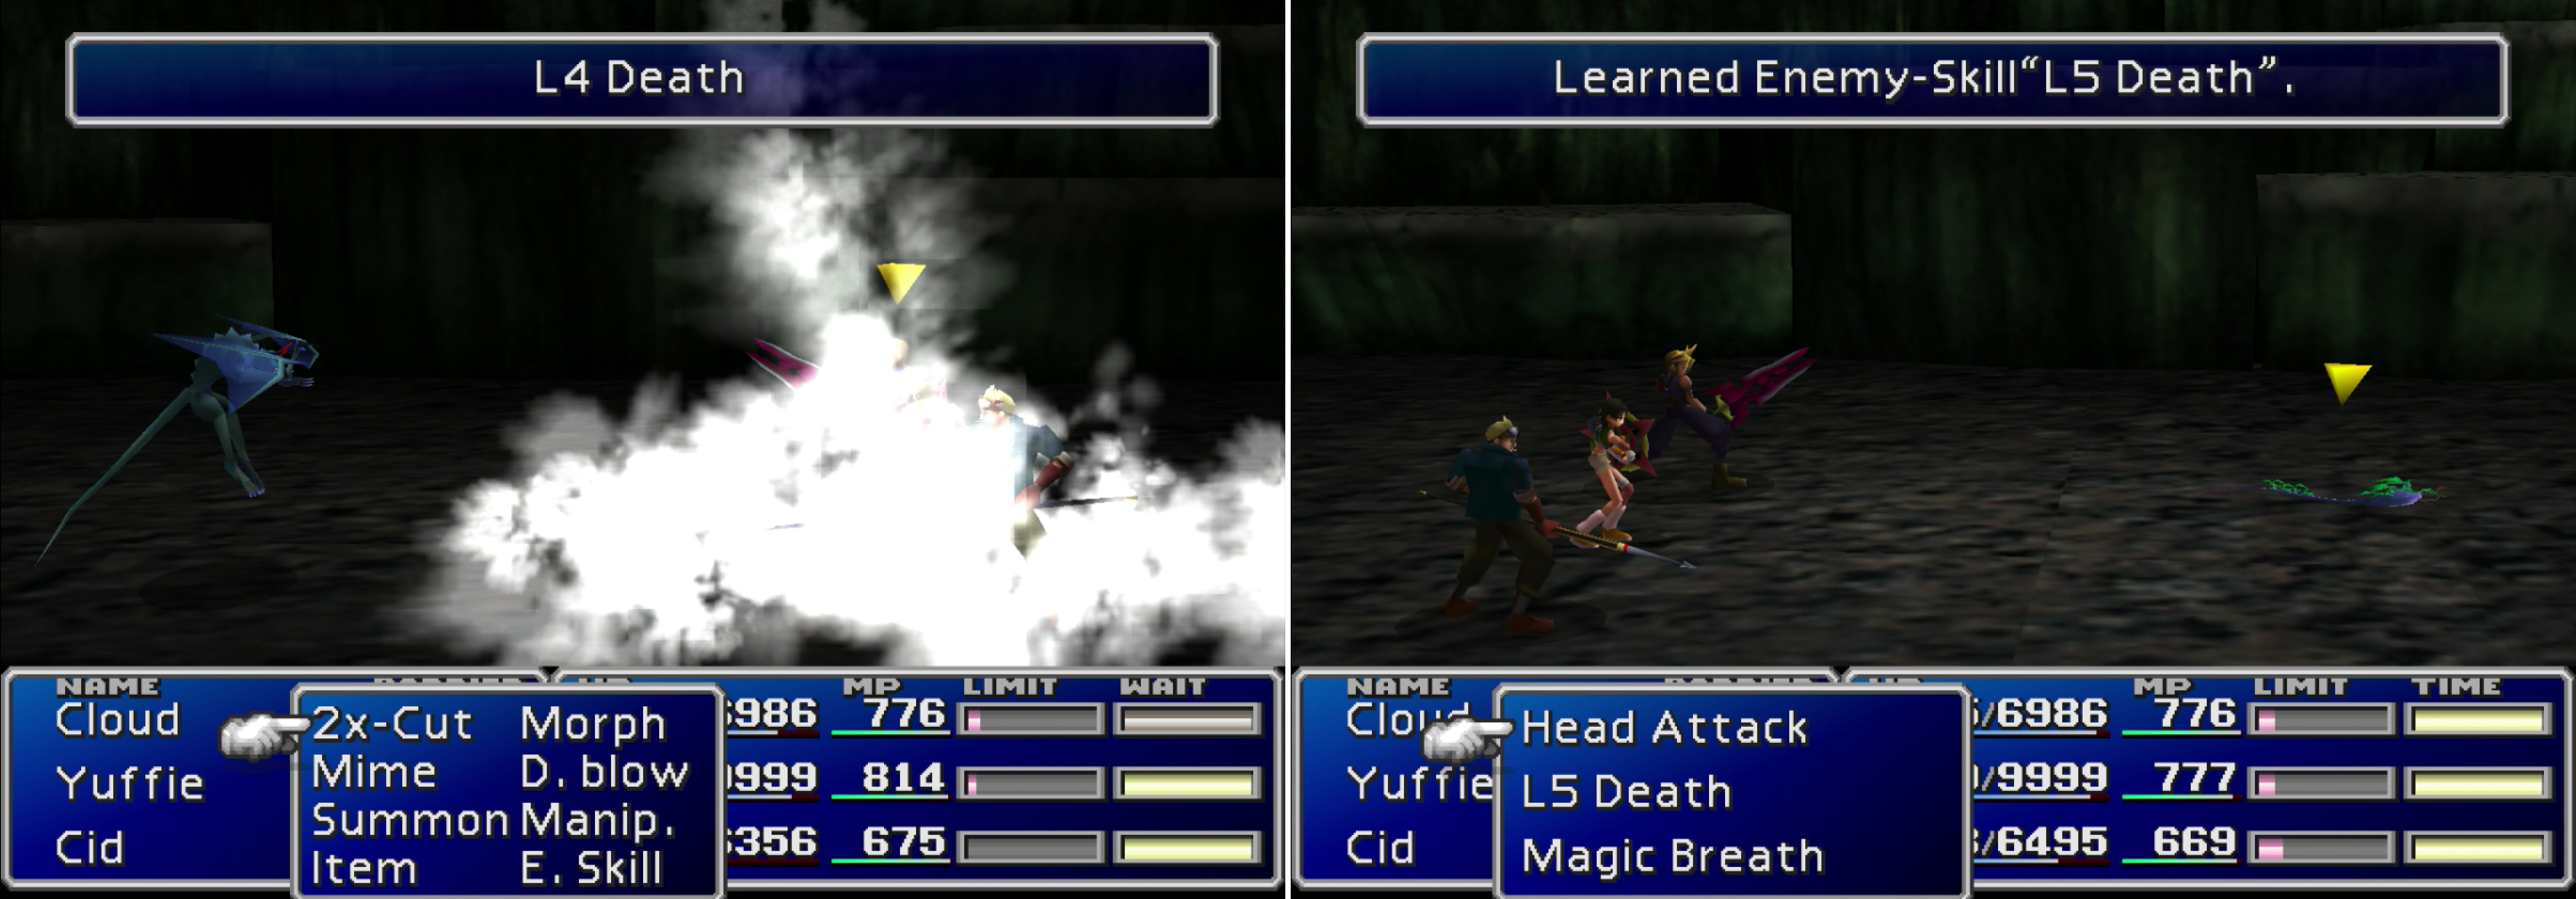 Gargoyles will cast "L4 Death" as a final attack before they die (left), be sure to protect yourself with "Death Force". You can learn the "L5 Death" and "Magic Breath" Enemy Skills from Parasites (right).